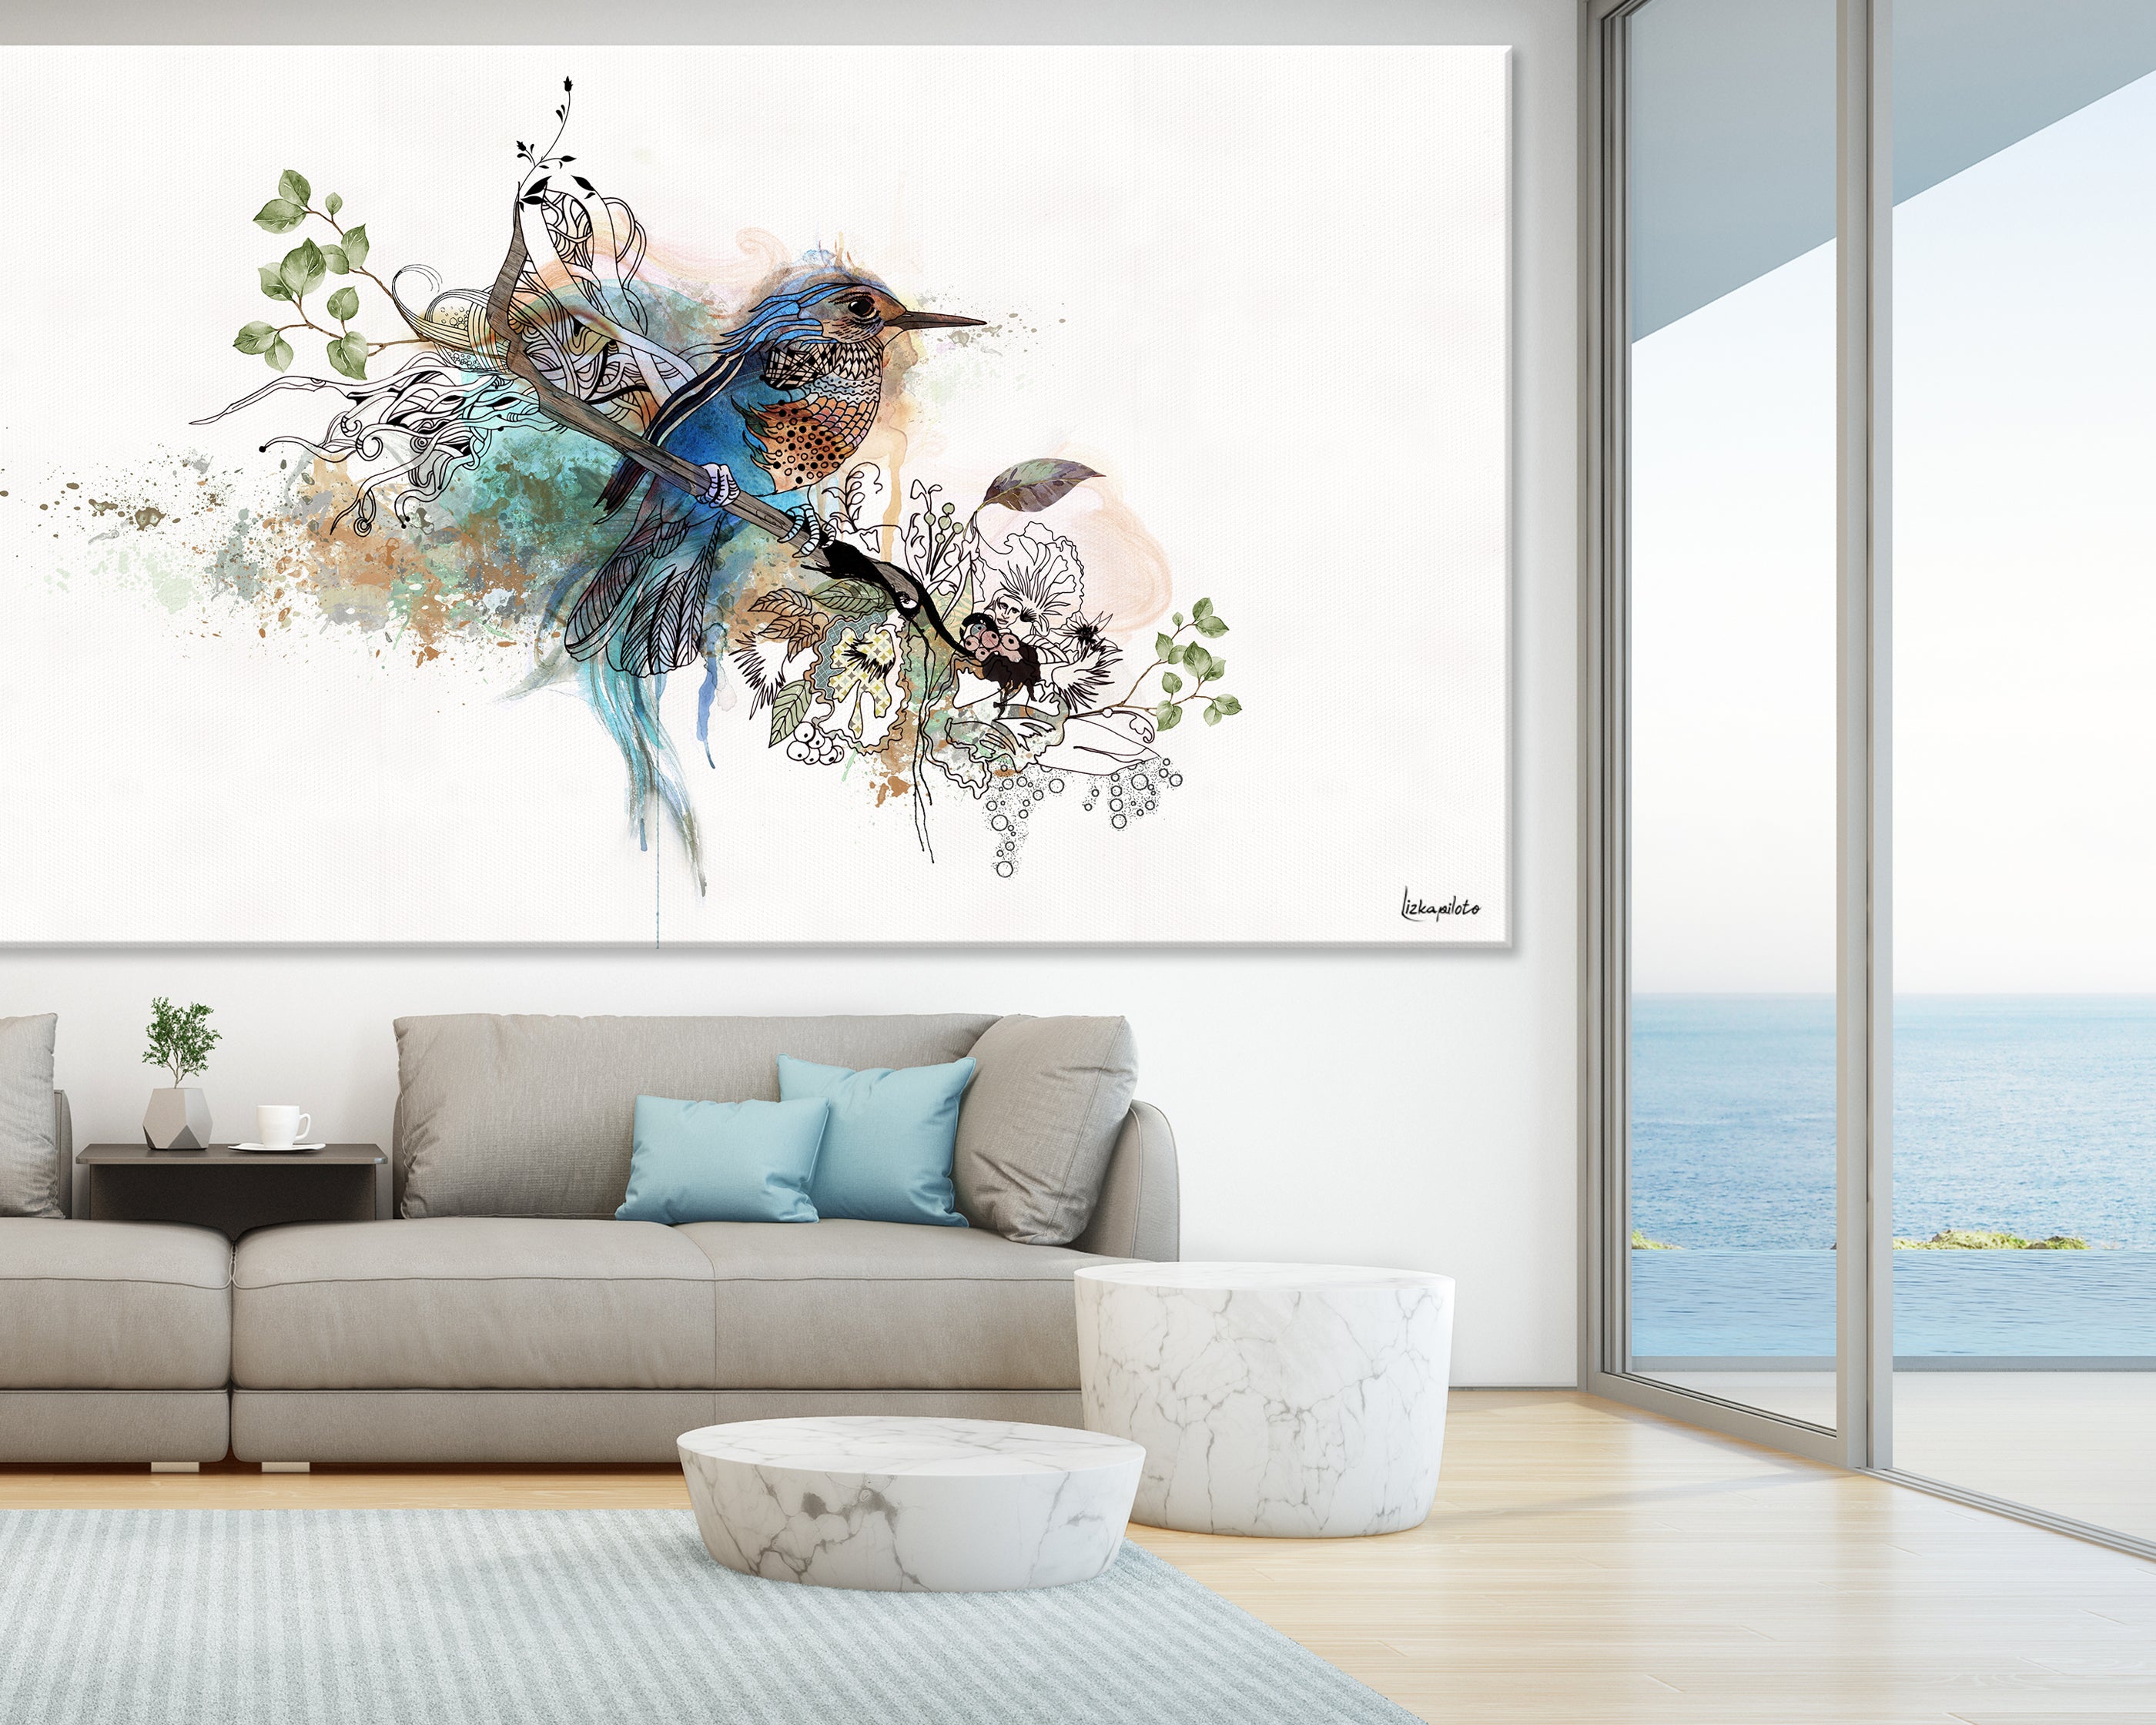 Large wall art of blue bird painting, above sofa